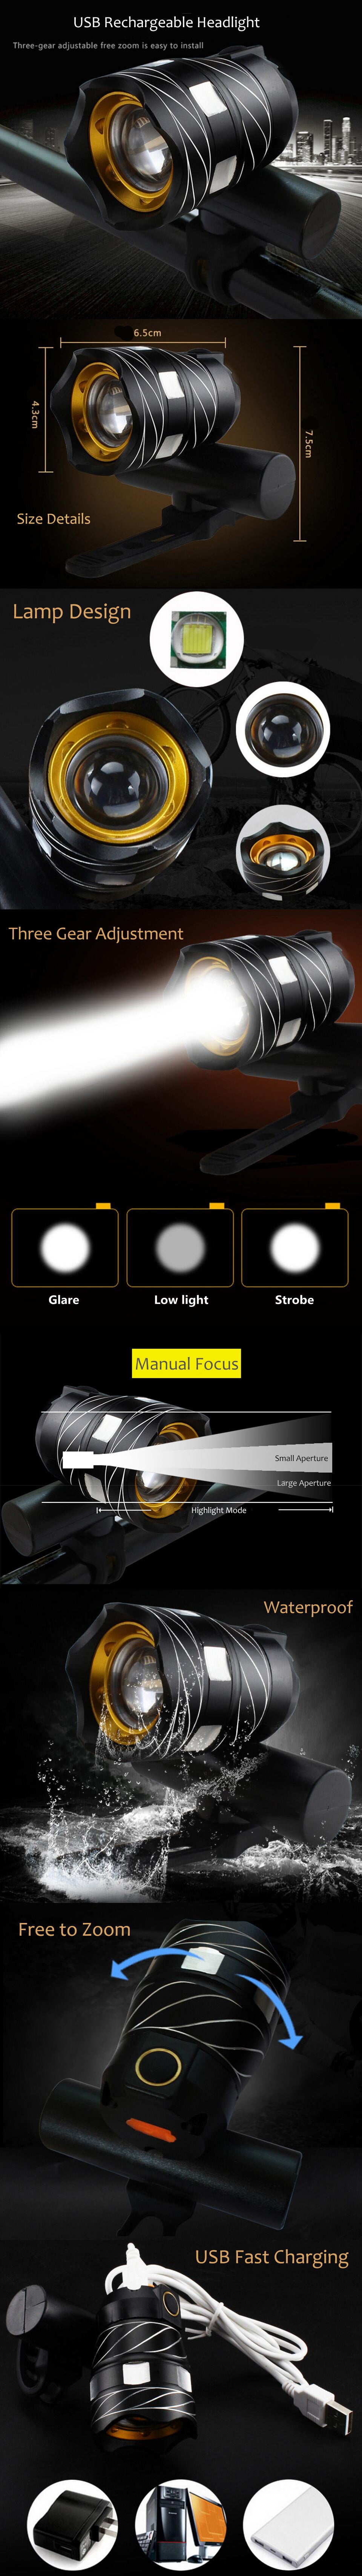 XANES ZL01 800LM T6 Bicycle Light Three Modes Zoomable Night Riding USB Rechargeable Waterproof